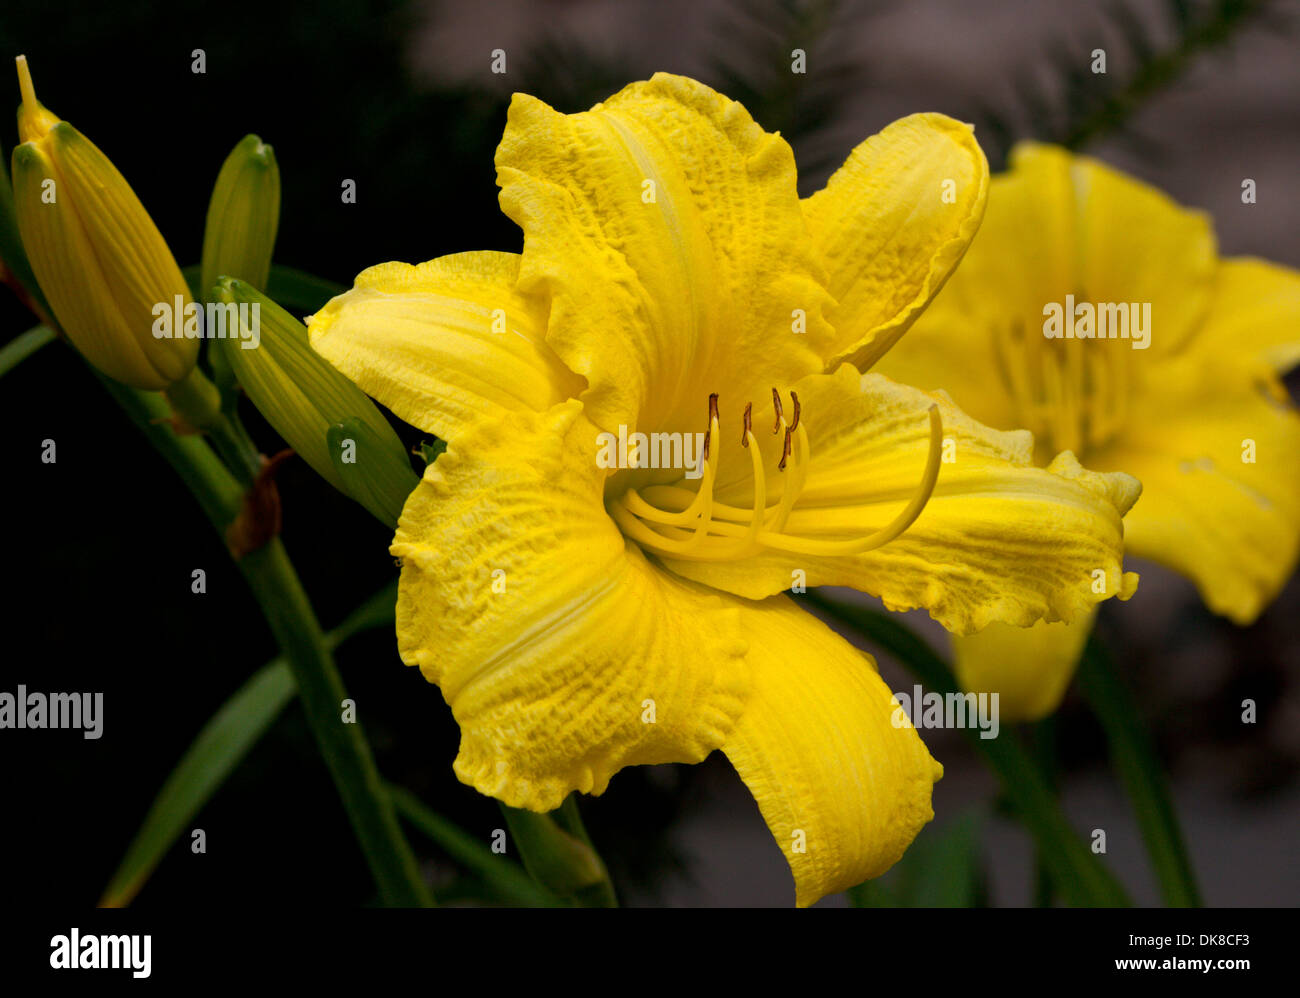 bright yellow flower day lily Stock Photo